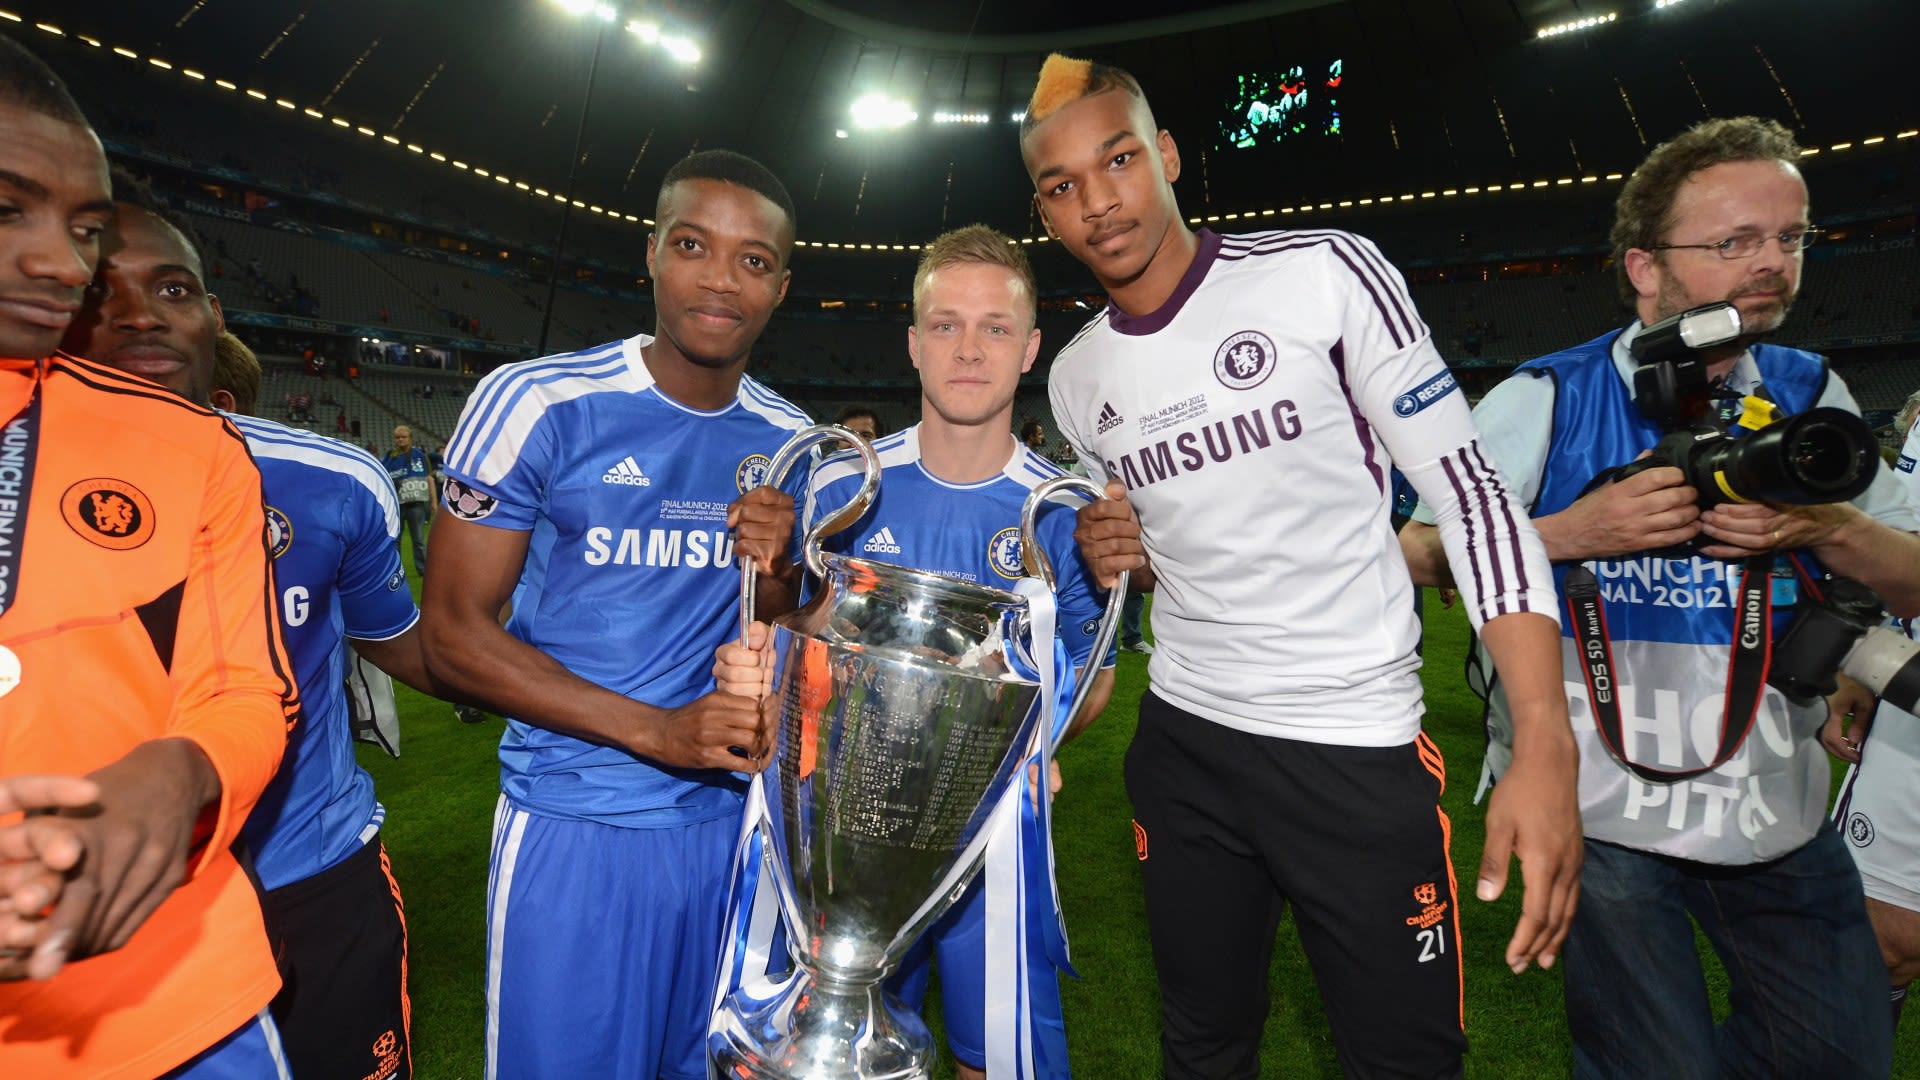 Ex-Chelsea whizkid who lifted Champions League trophy unemployed after L2 glory